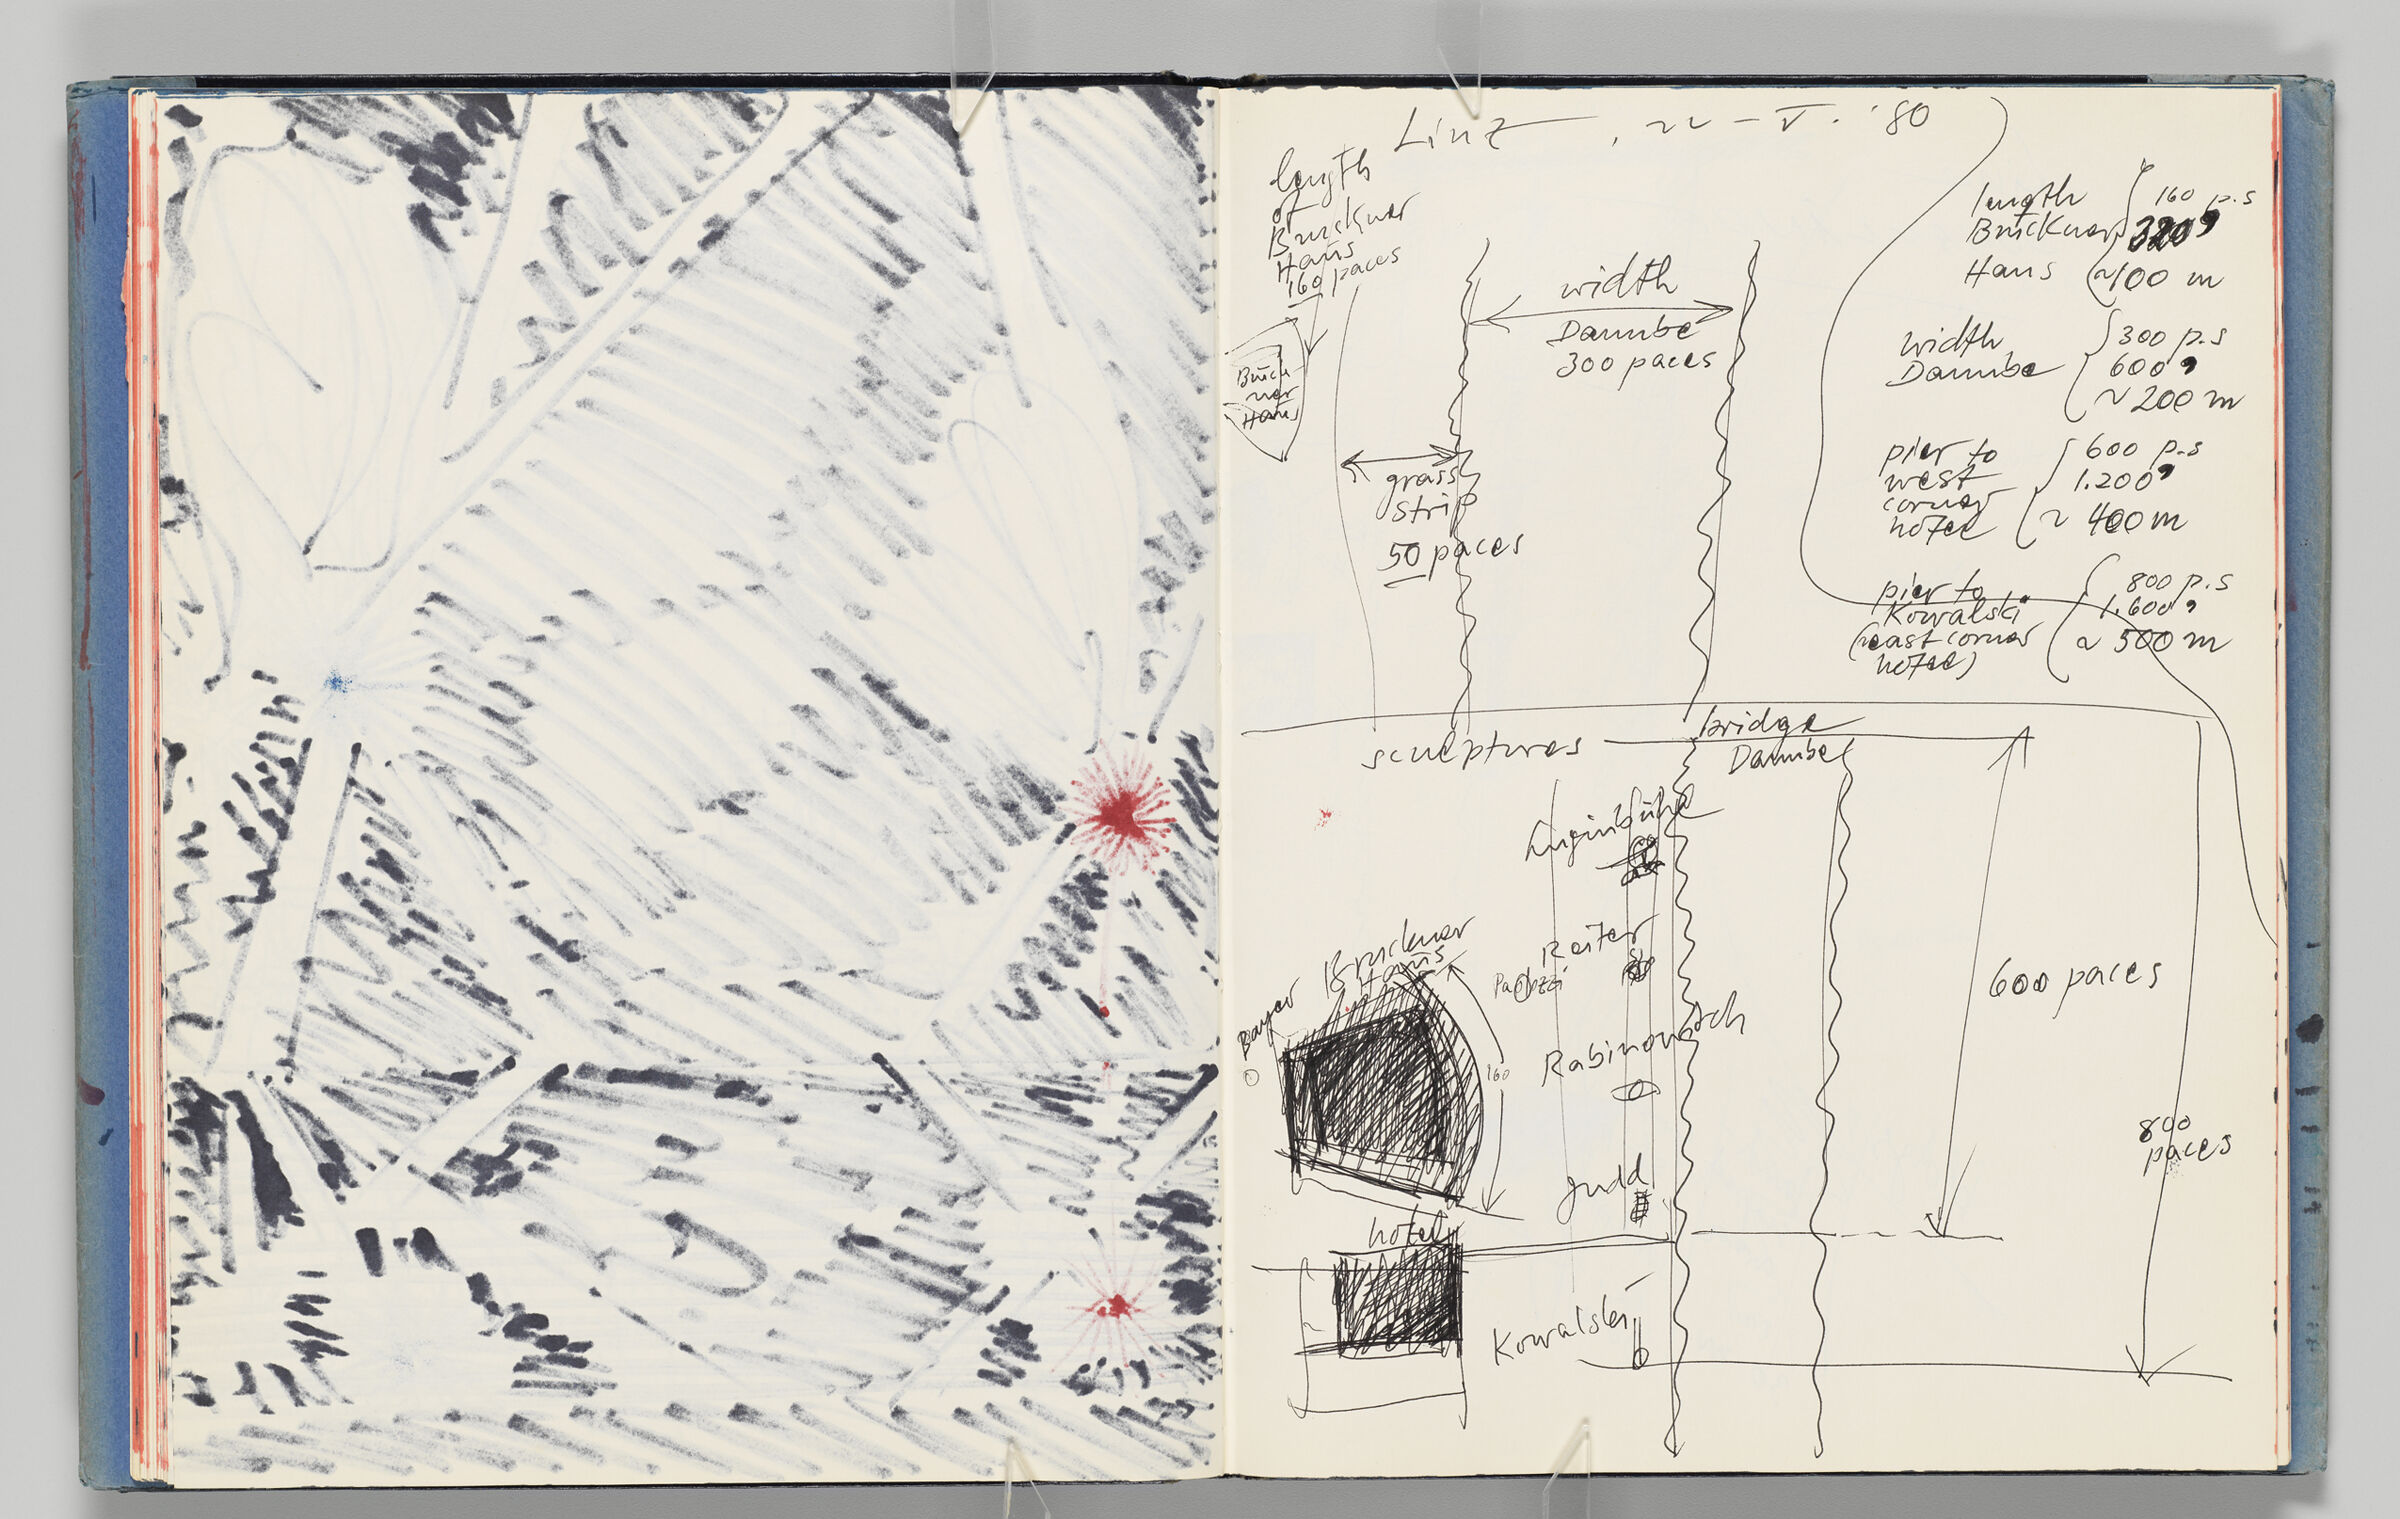 Untitled (Bleed-Through Of Previous Page, Left Page); Untitled (Notes About Linz Project, Right Page)